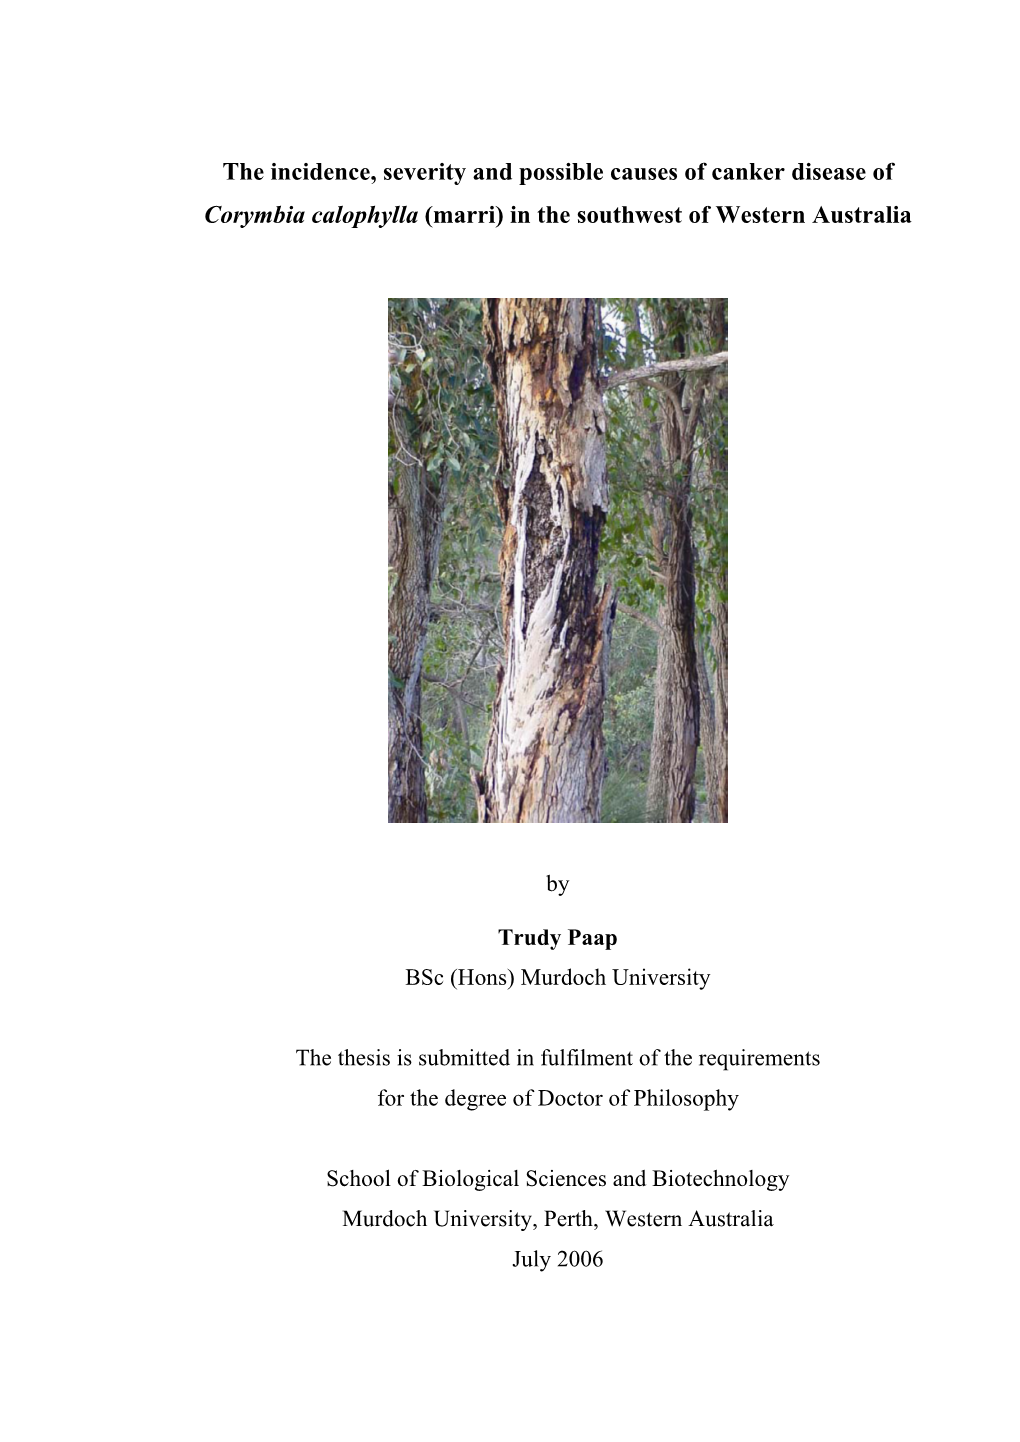 The Incidence, Severity and Possible Causes of Canker Disease of Corymbia Calophylla (Marri) in the Southwest of Western Australia